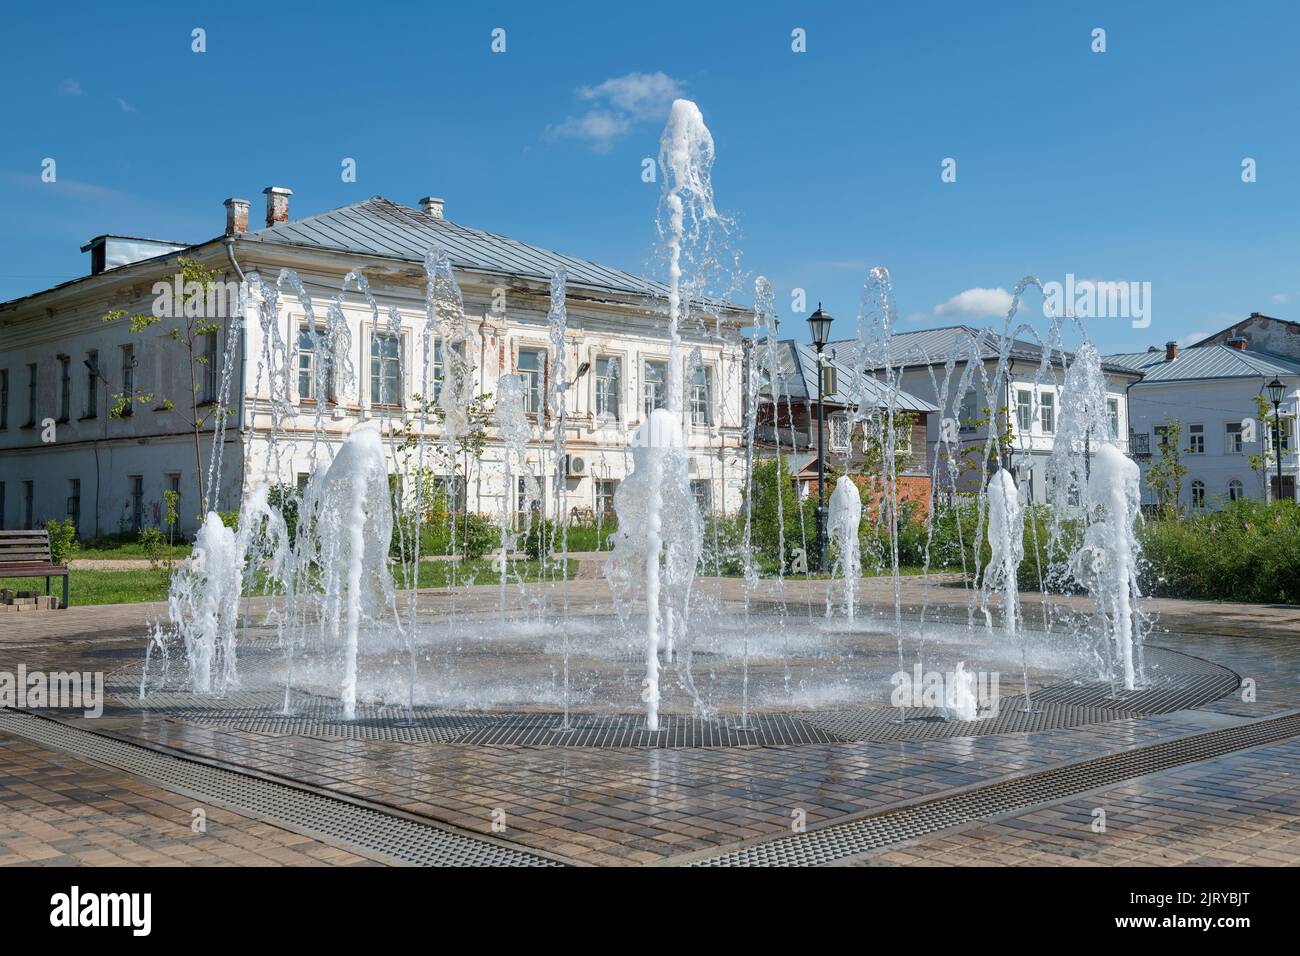 USTYUZHNA, RUSSIA - AUGUST 04, 2022: City fountain on the old Trading Square close-up on a sunny summer day Stock Photo